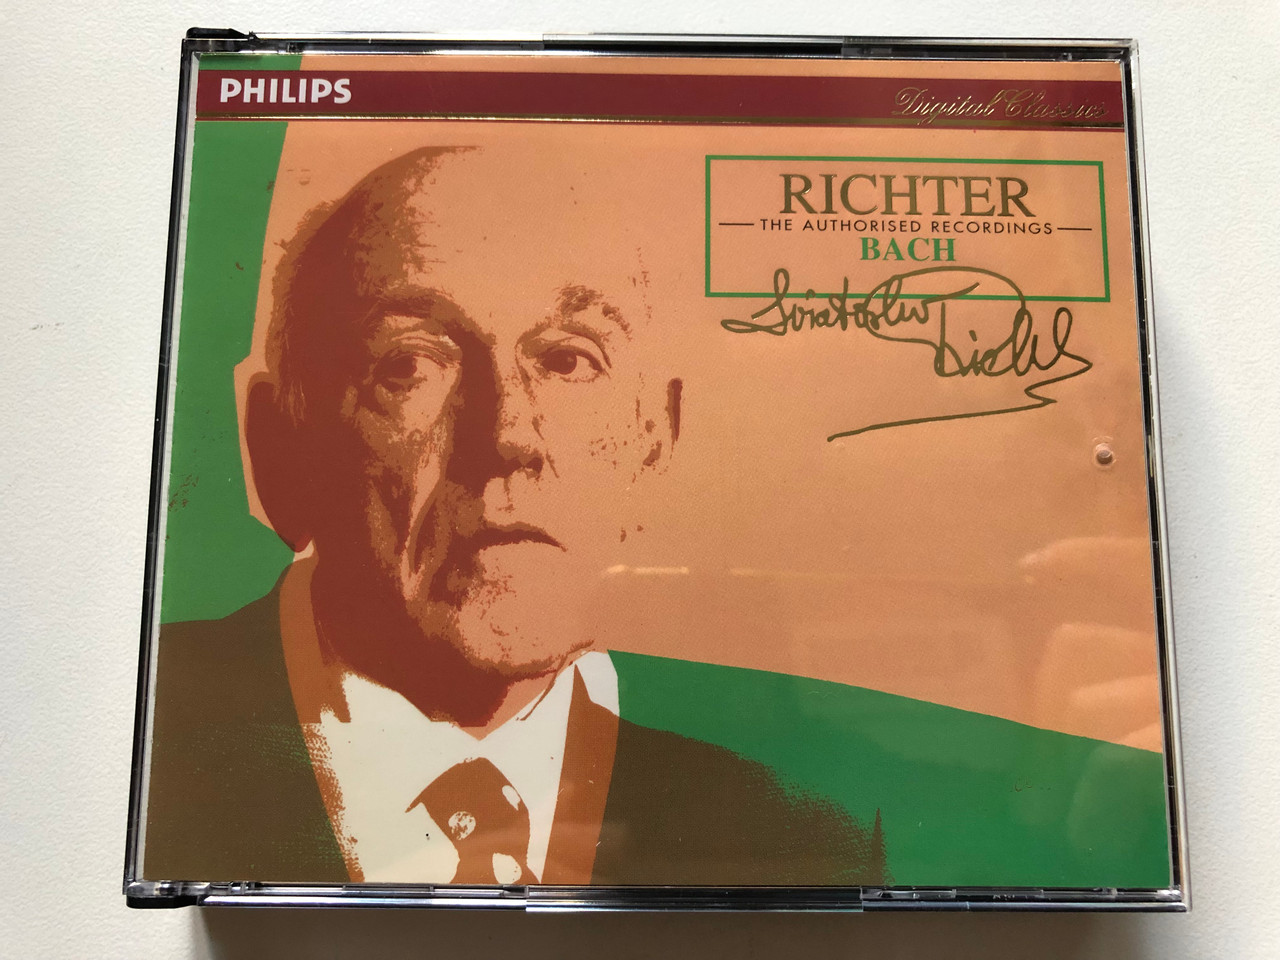 https://cdn10.bigcommerce.com/s-62bdpkt7pb/products/0/images/312360/Richter_The_Authorised_Recordings_-_Bach_Philips_3x_Audio_CD_1994_438_613-2_1__82896.1699997154.1280.1280.JPG?c=2